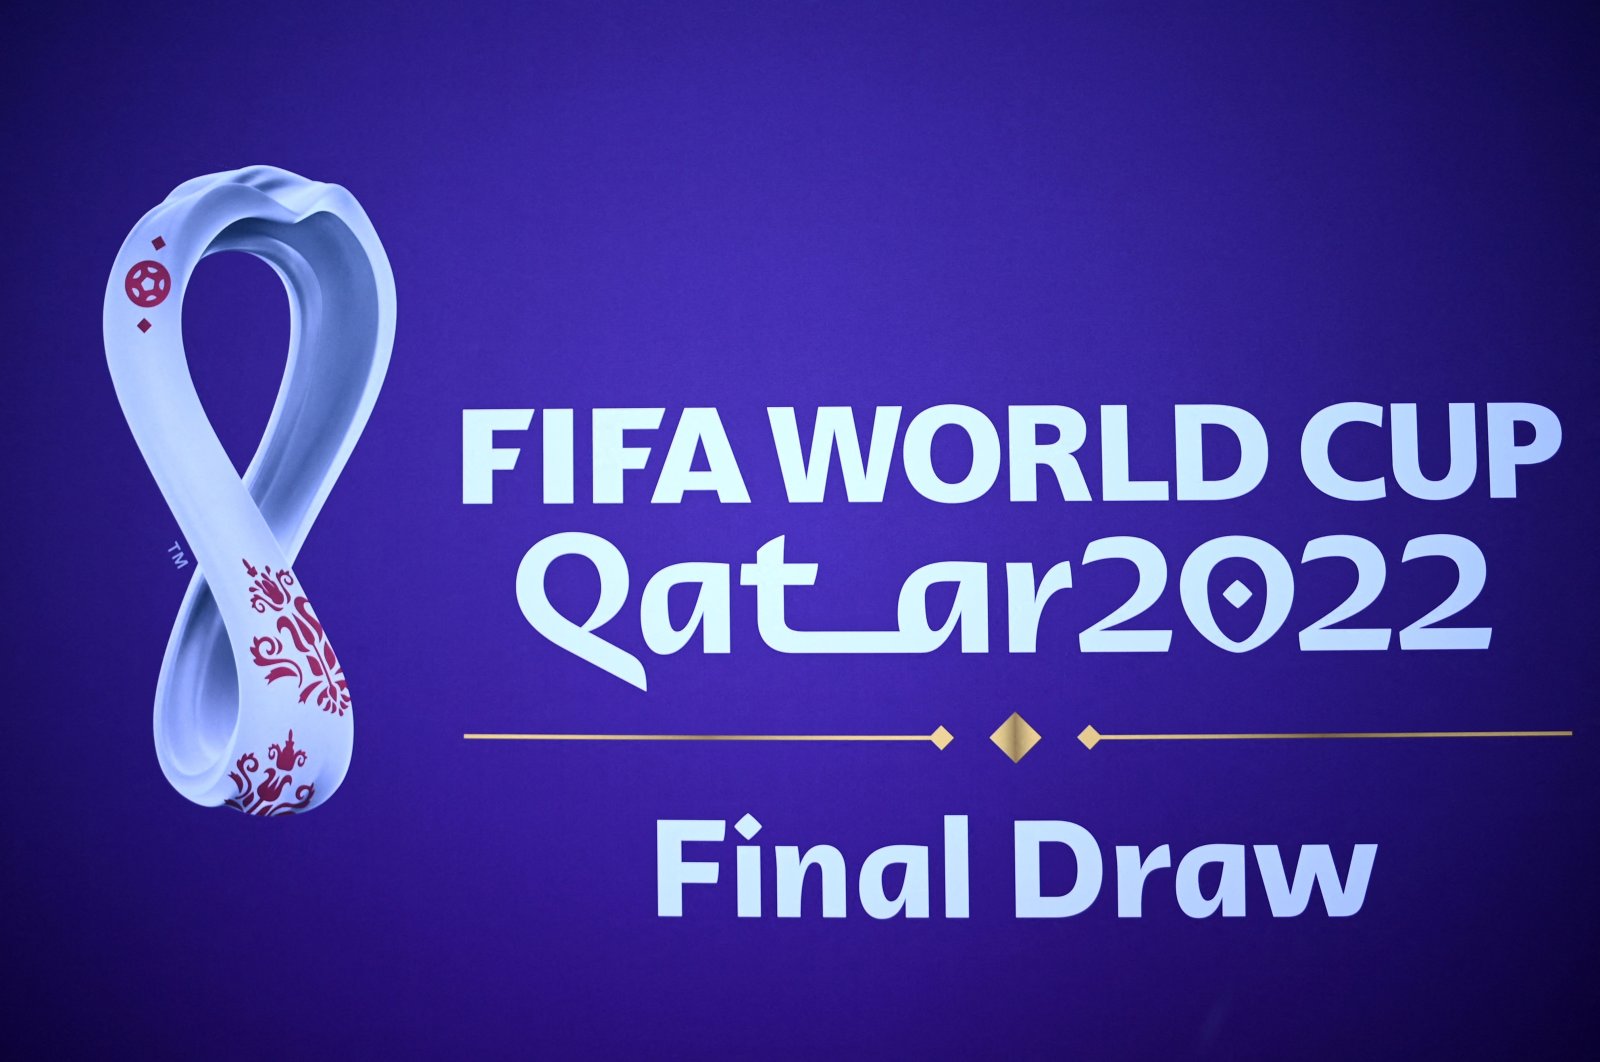 The 2022 Qatar World Cup logo ahead of the Final Draw in Doha, Qatar, April 1, 2022. (AFP Photo)